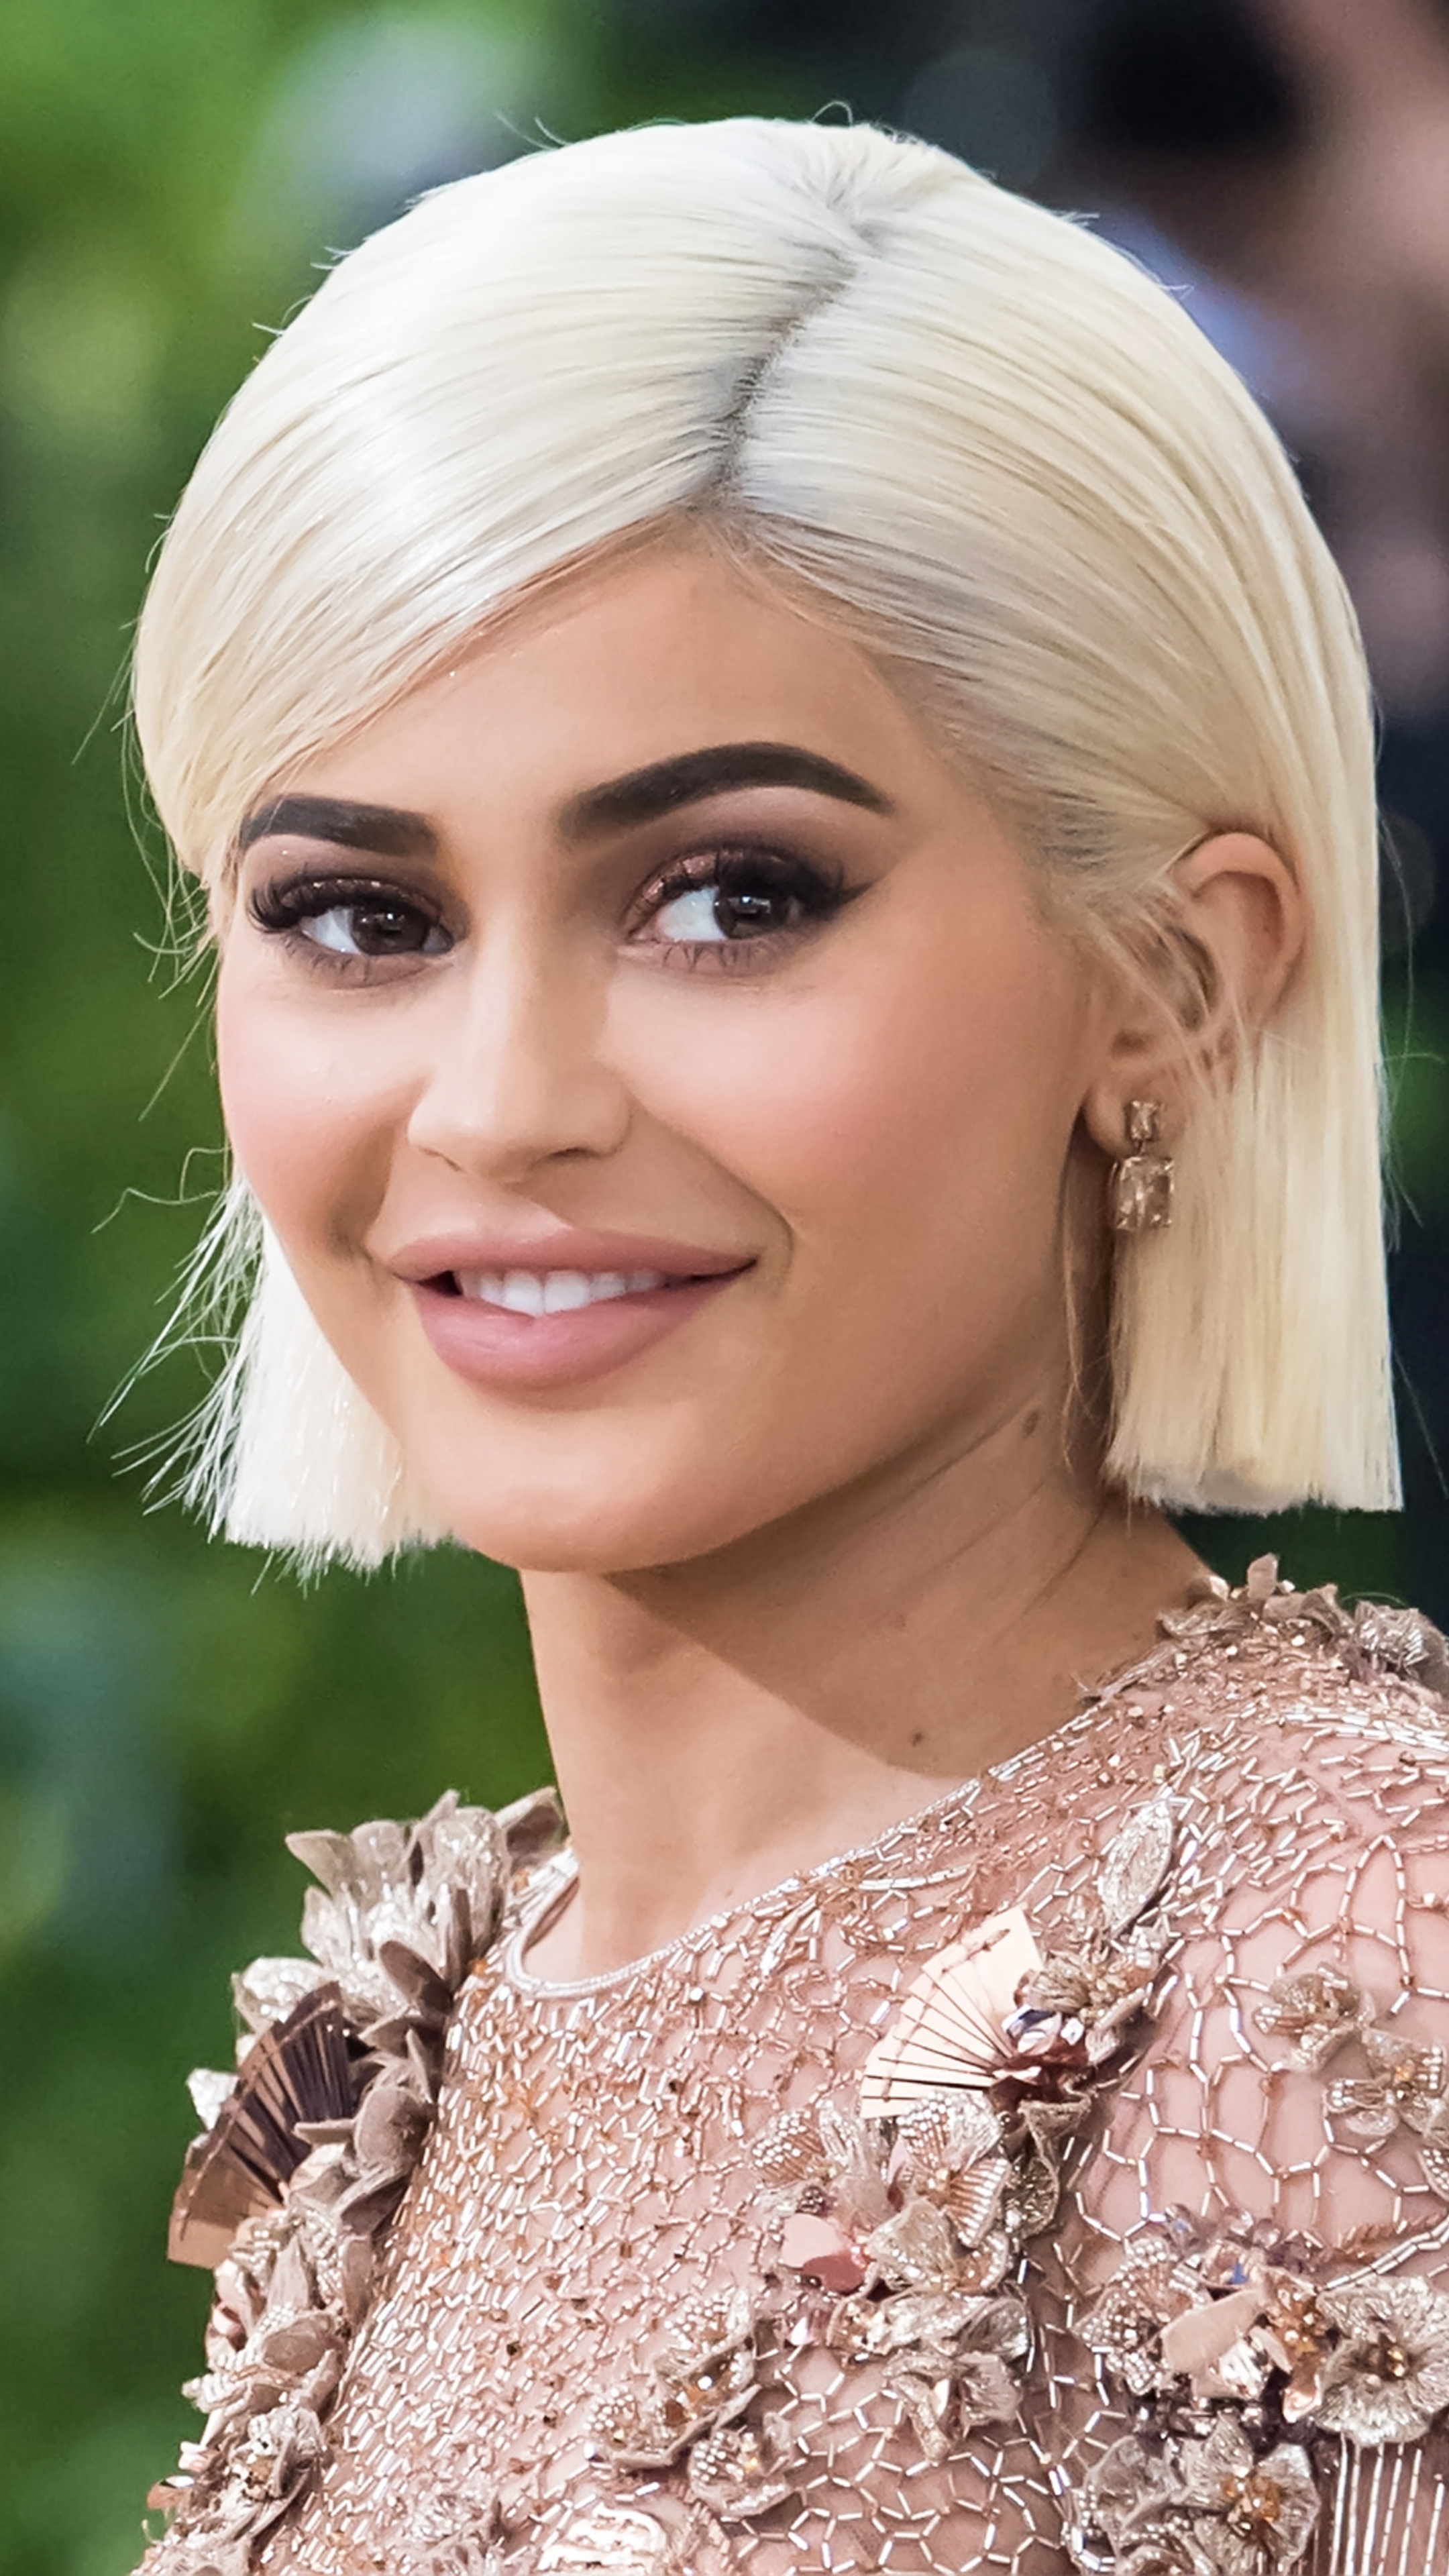 Kylie Jenner, Captivating smile, Sony Xperia wallpaper, High quality, 2160x3840 4K Handy